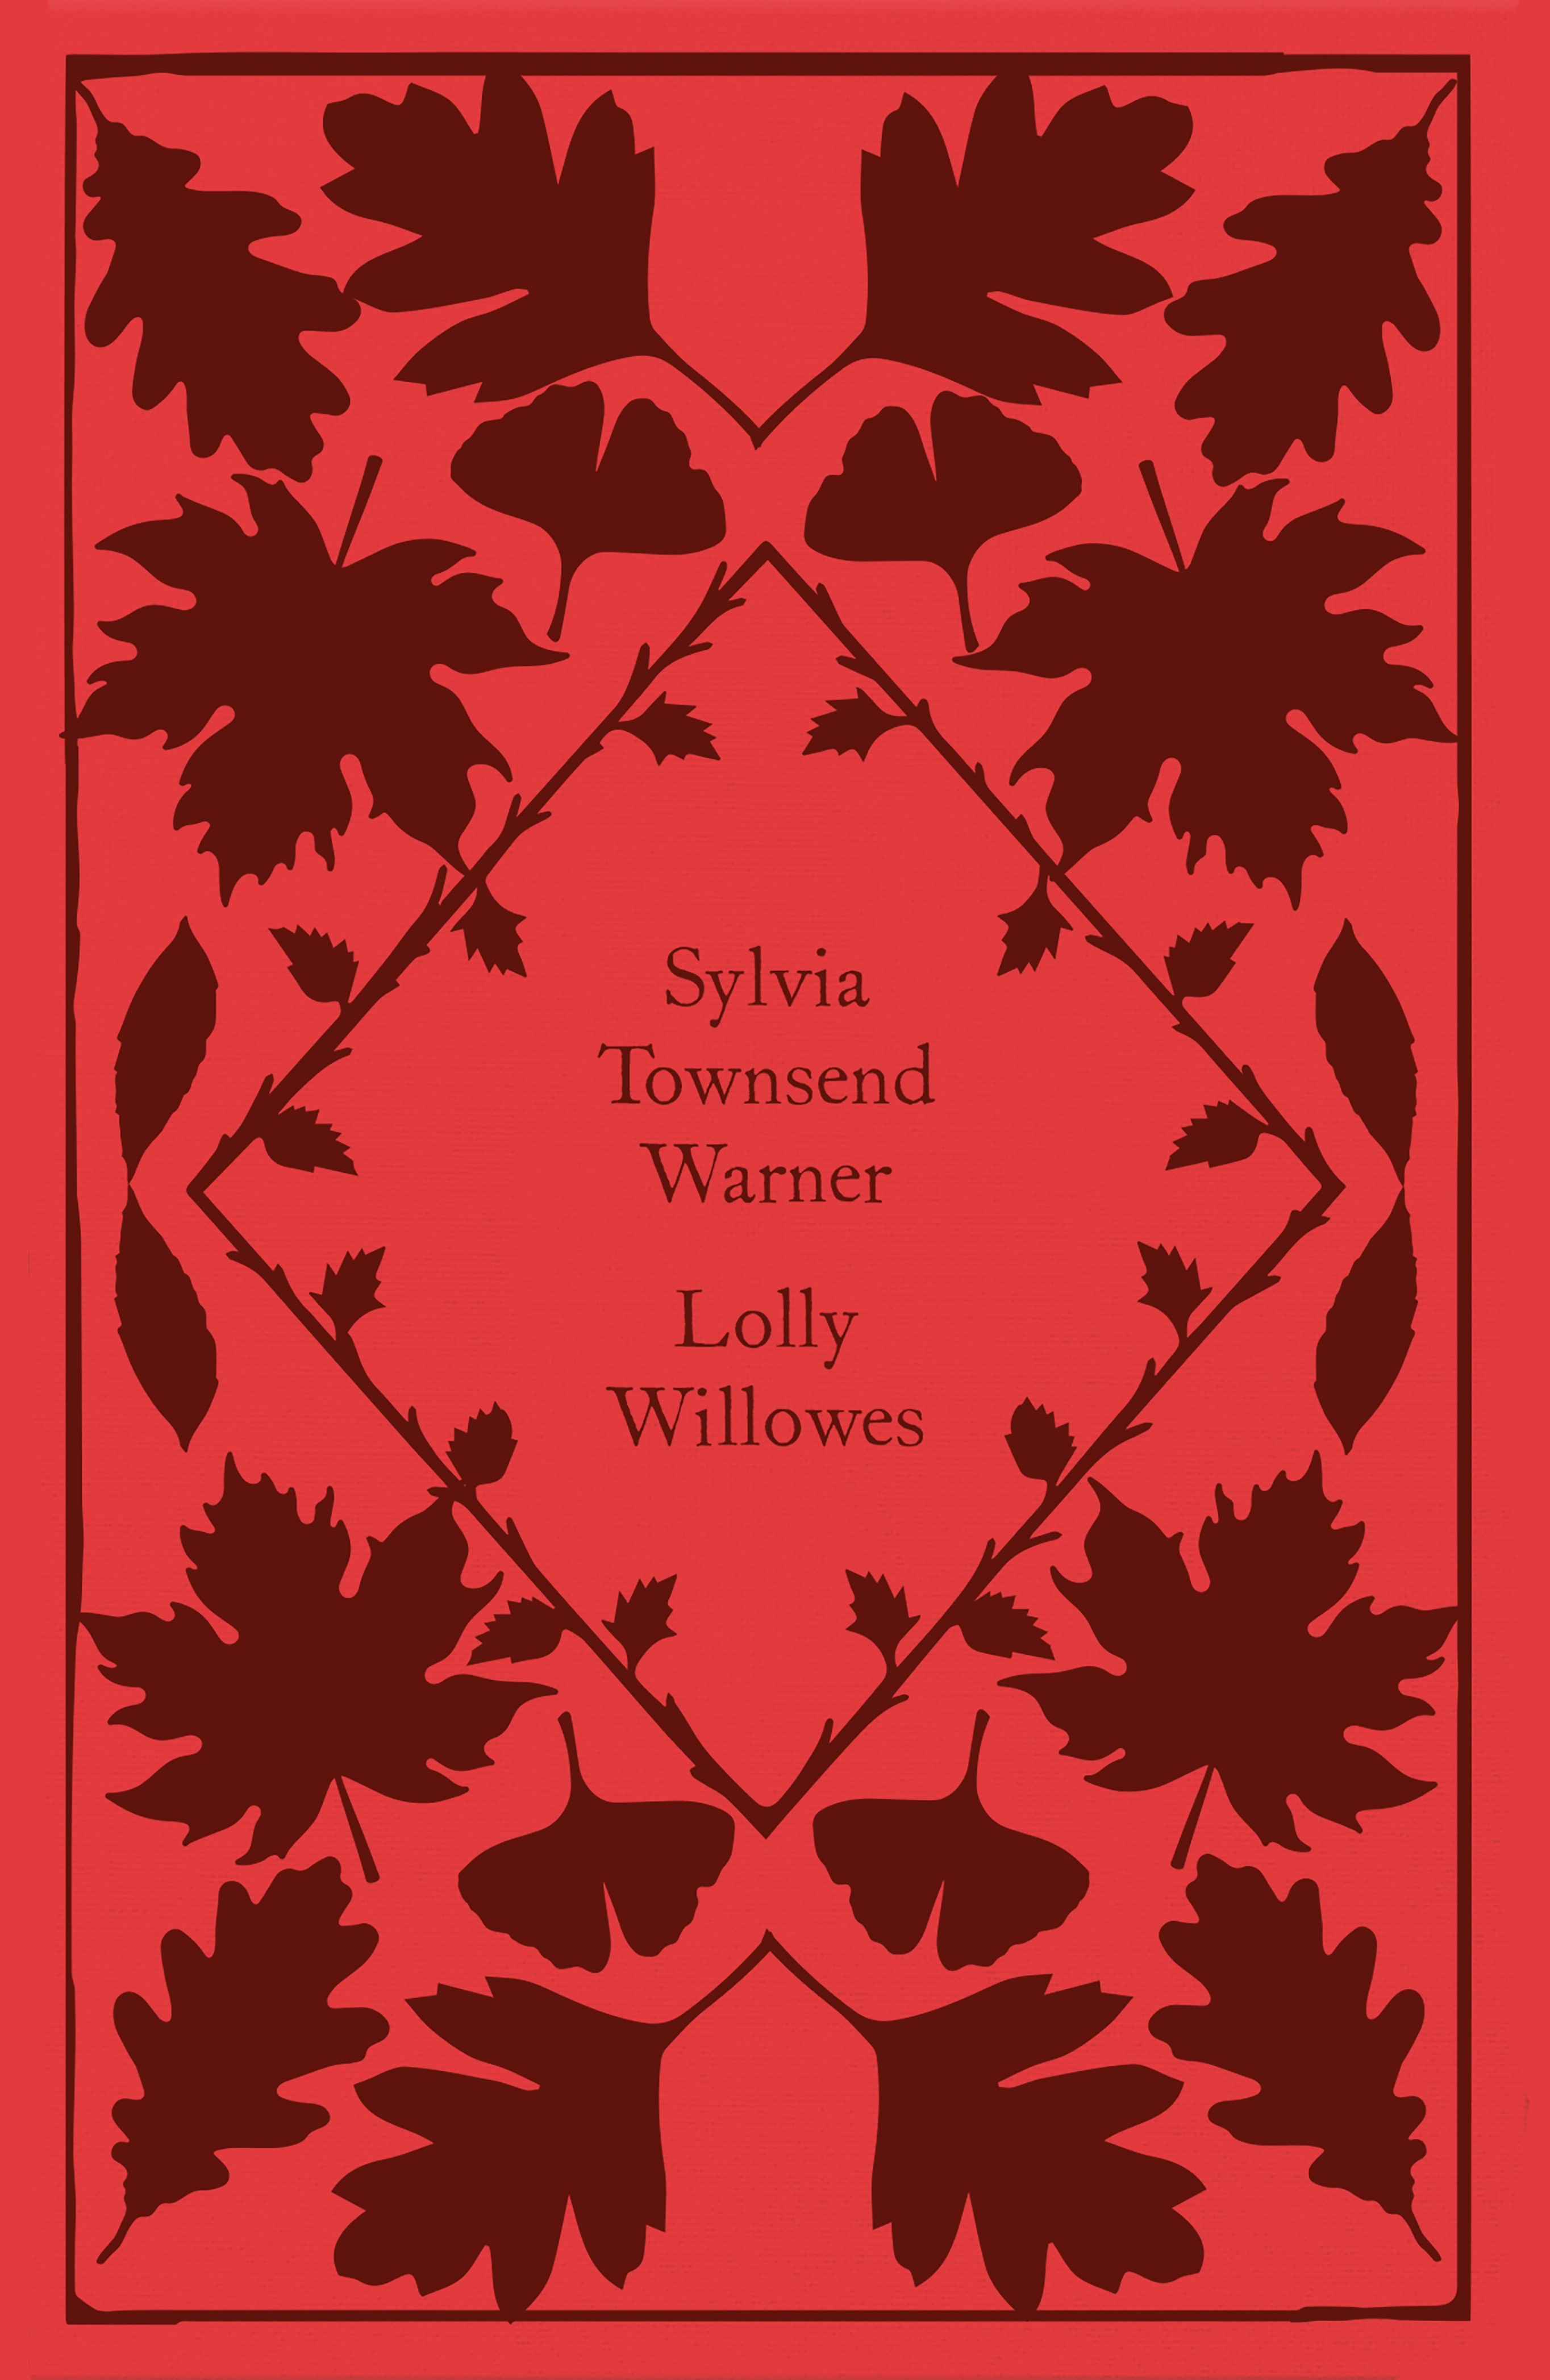 Book “Lolly Willowes” by Sylvia Townsend Warner — August 25, 2022